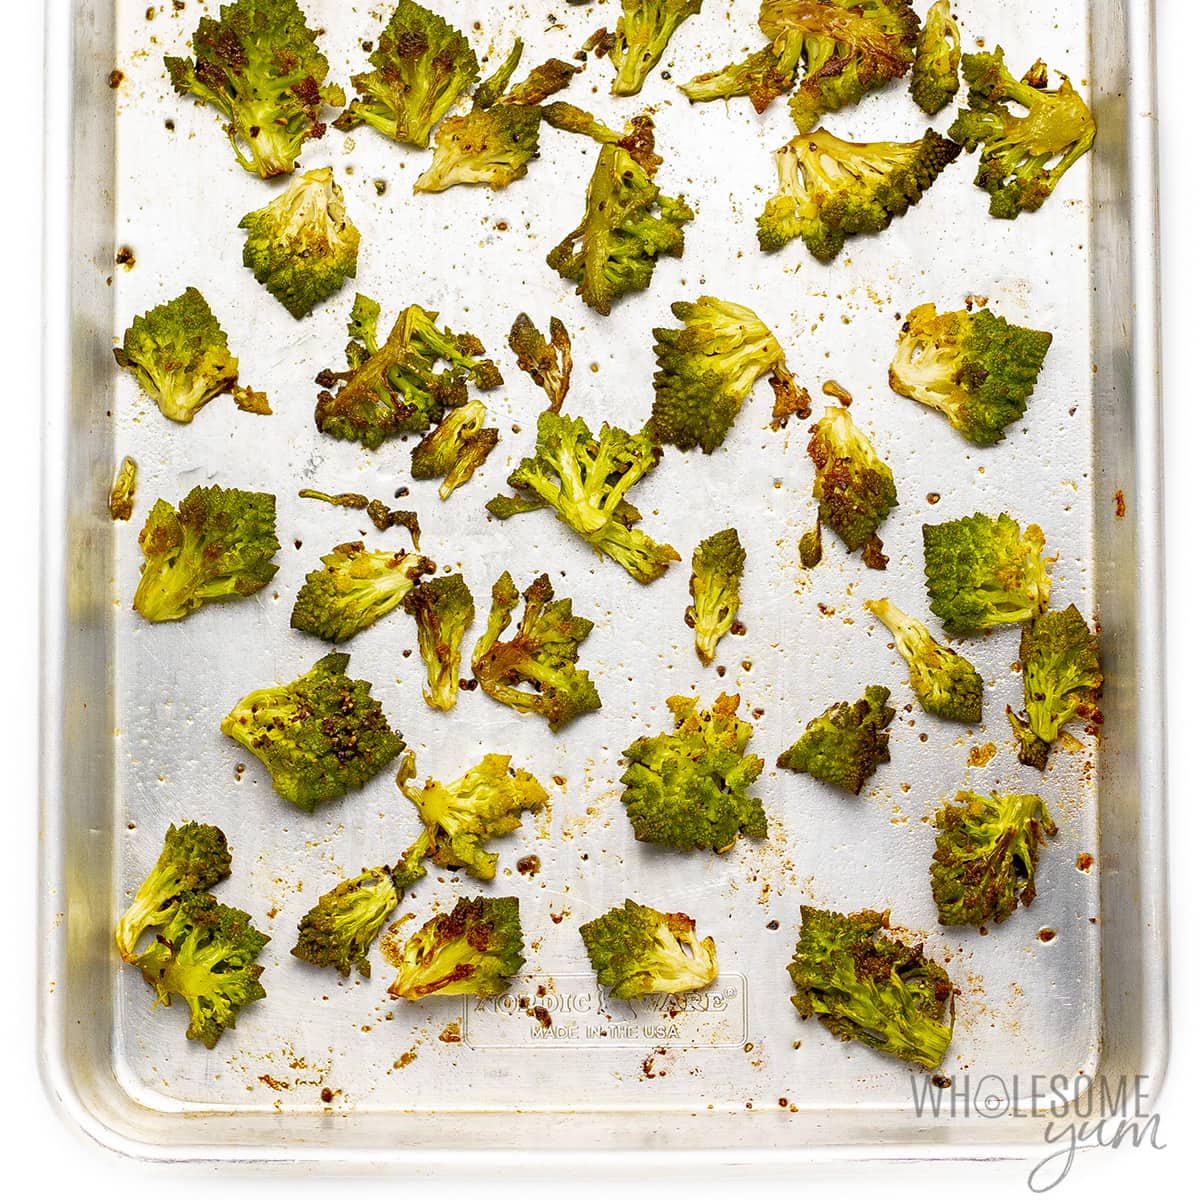 Fully cooked romanesco on a baking pan.